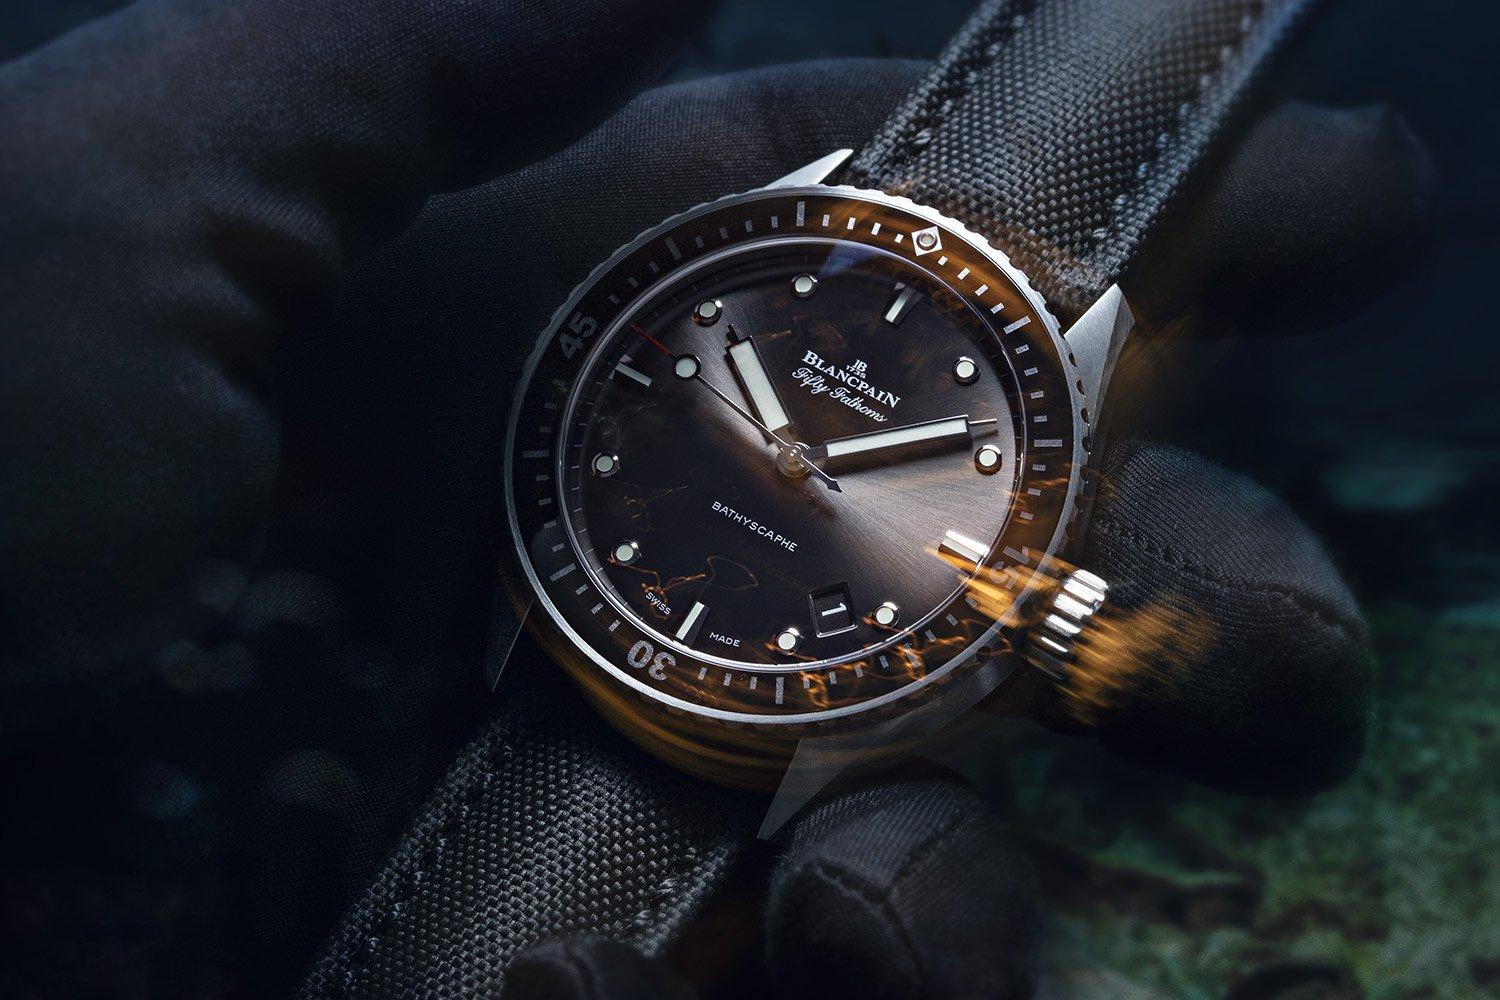 Blancpain: A Military Watch for Your Everyday Outfit